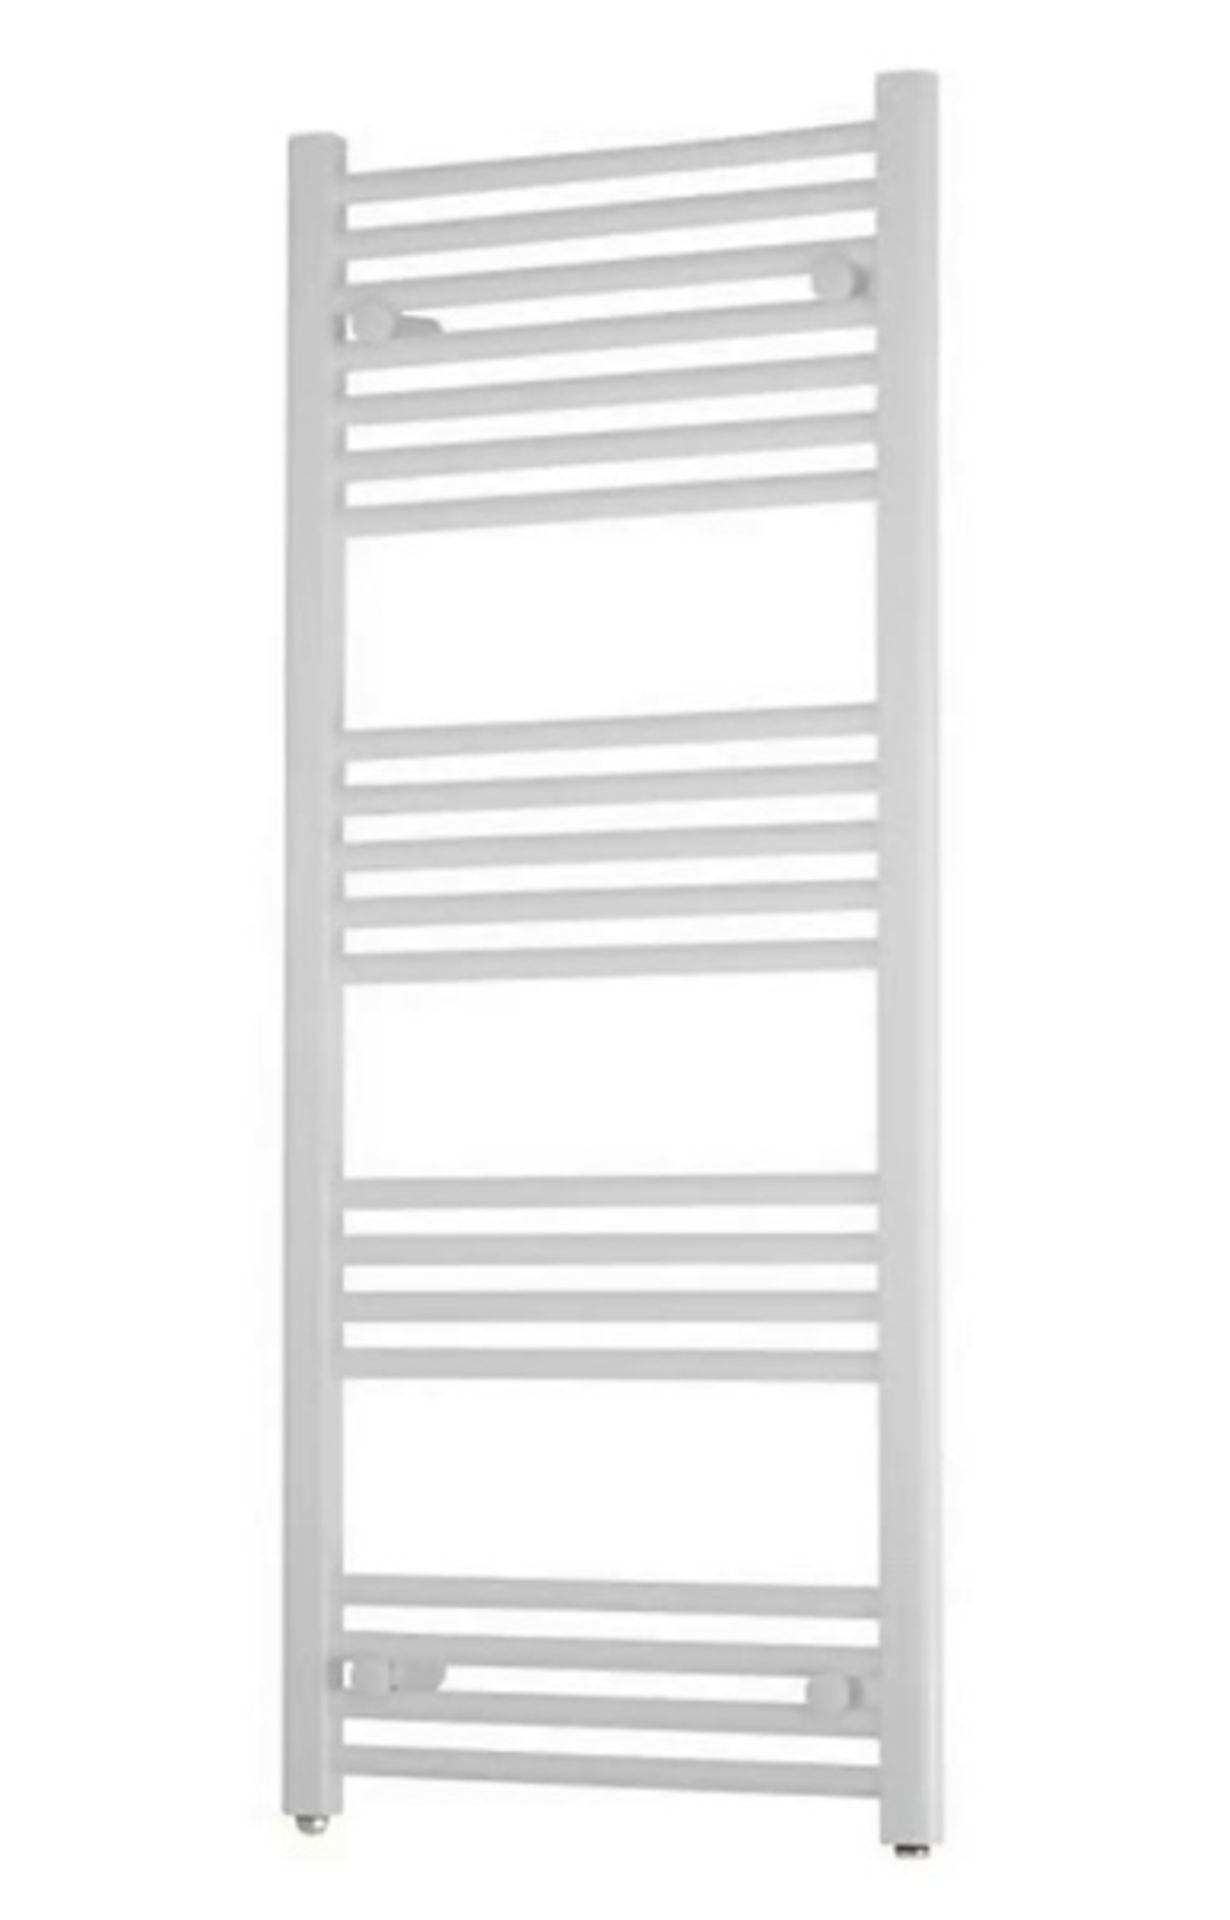 Brand New Boxed Independent Flat White Radiator - 1200 x 500mm RRP £100 *No Vat*